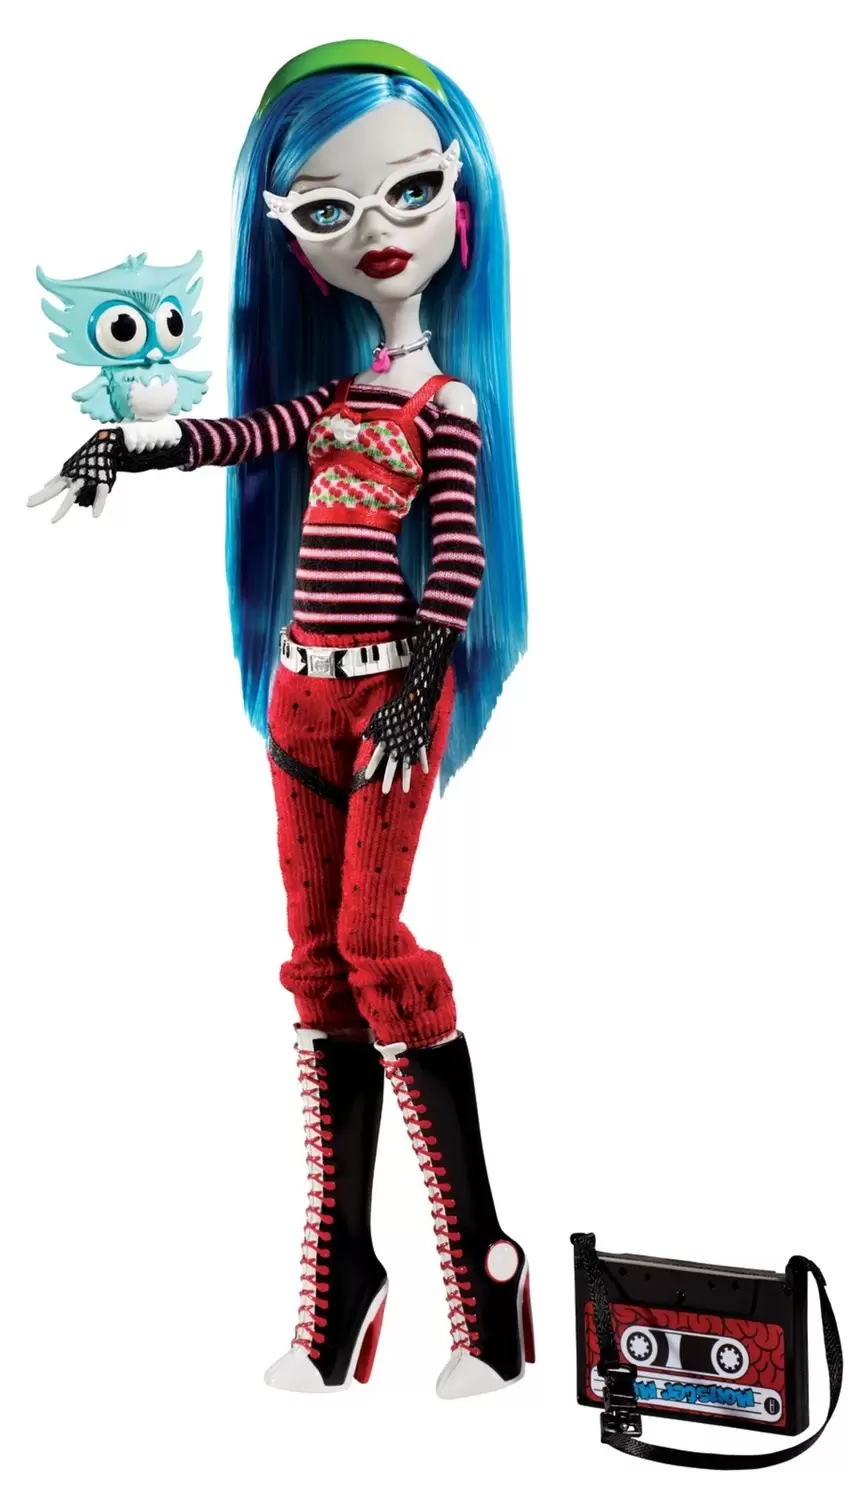 Monster High Dolls - Ghoulia Yelps - Basic